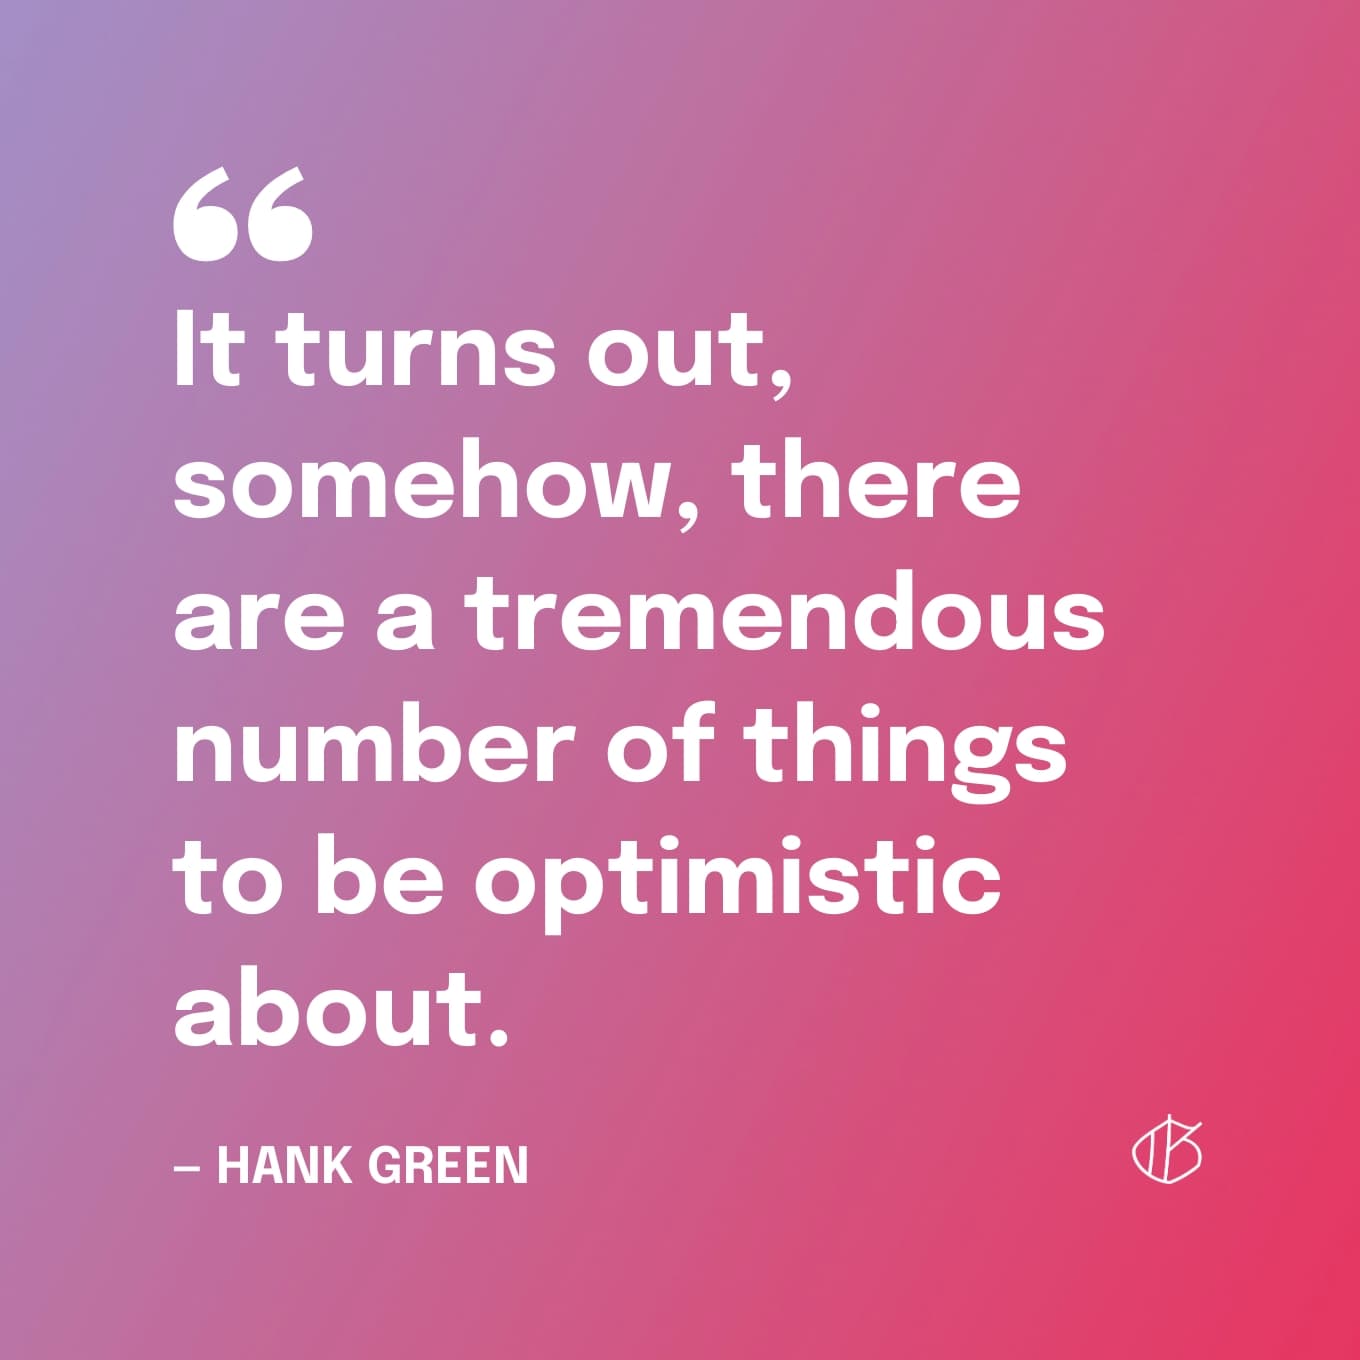 Quote: “It turns out, somehow, there are a tremendous number of things to be optimistic about.” ― Hank Green